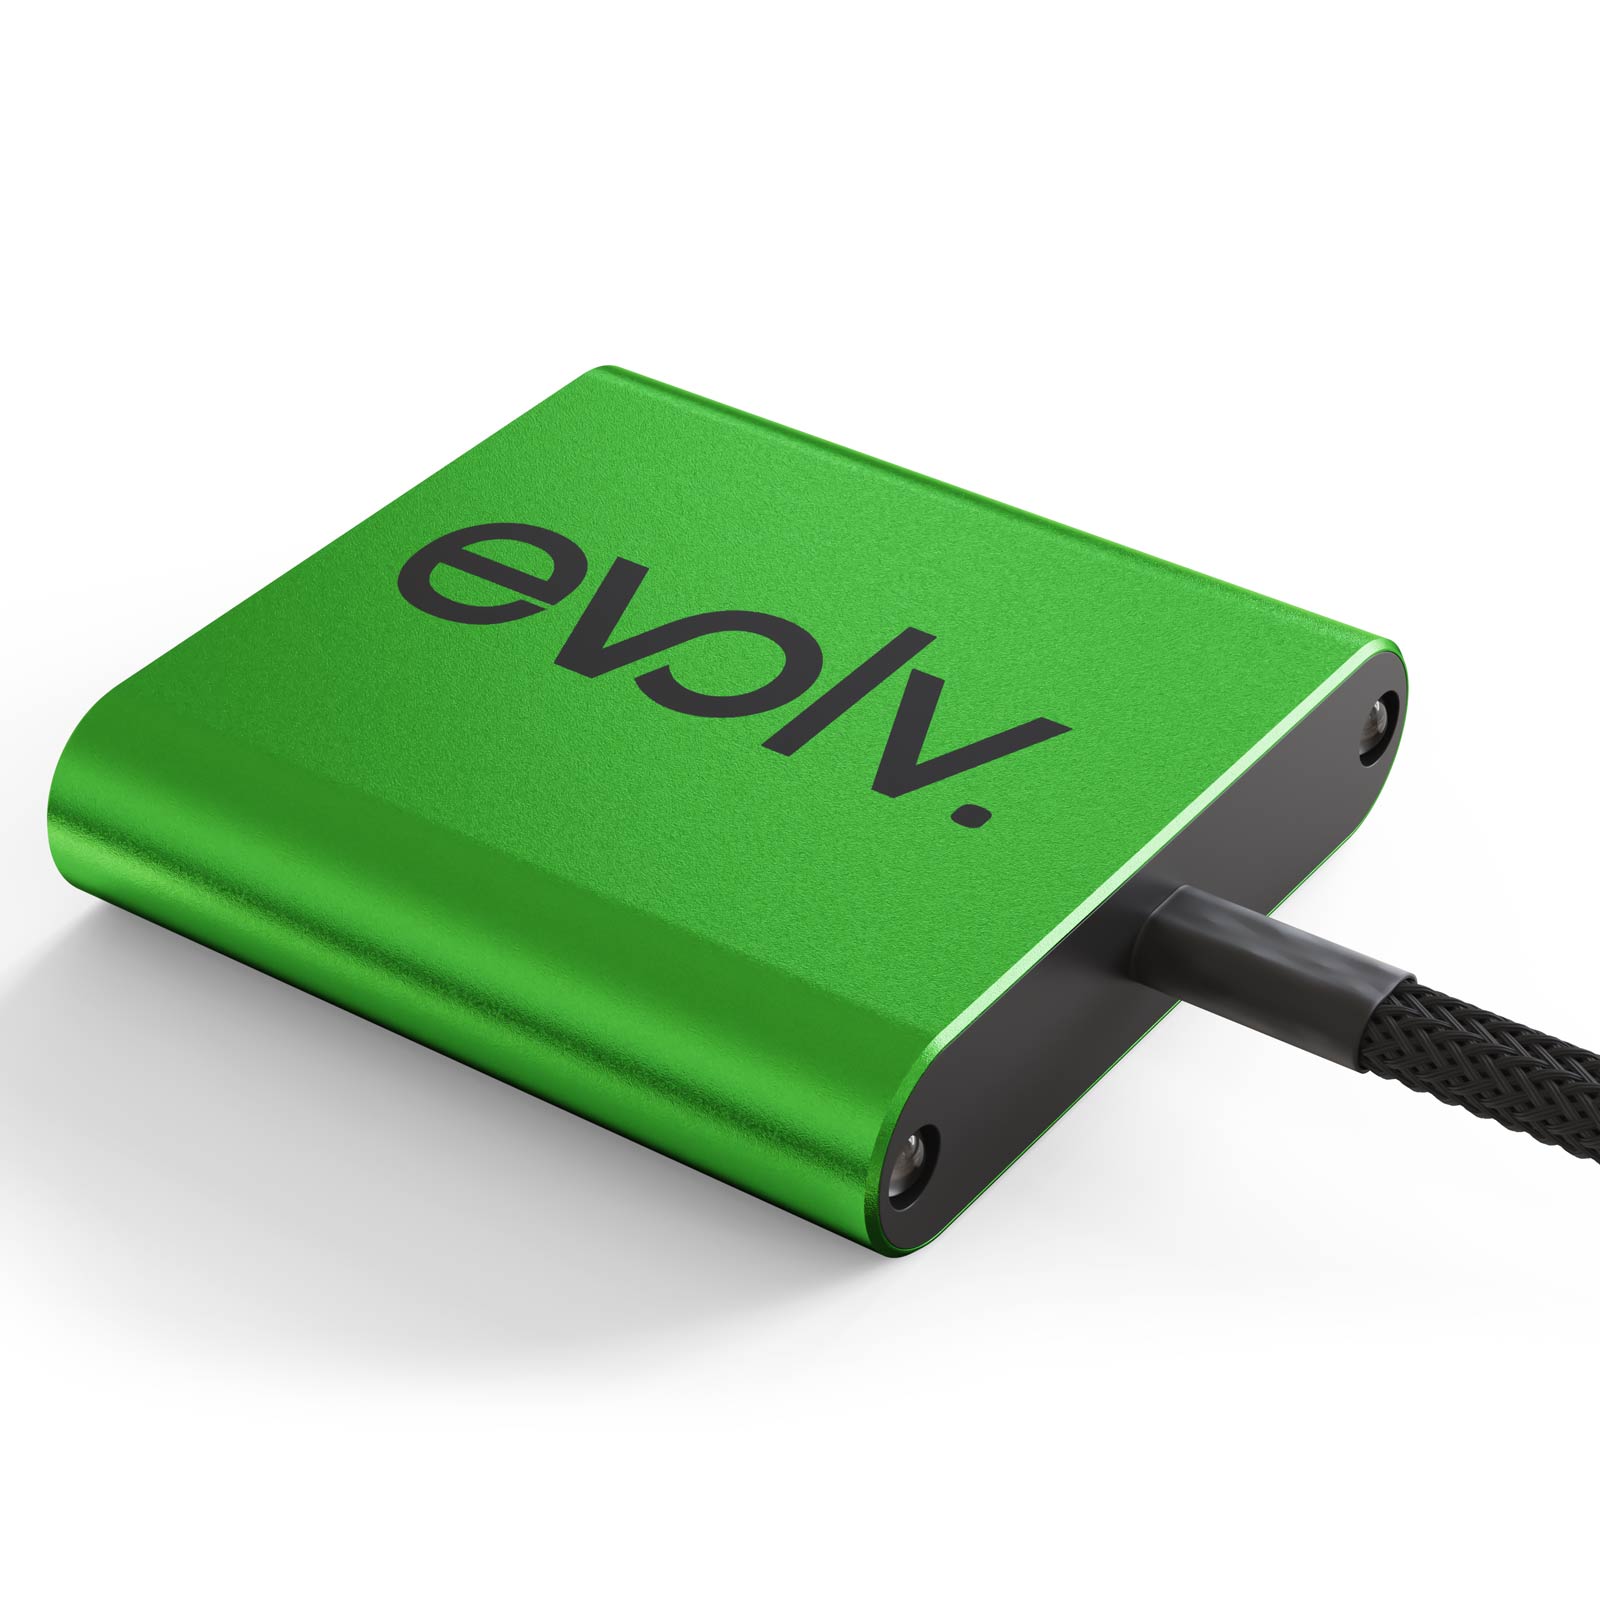 Increase your fuel mileage, performance and throttle response with an Evolv Chrysler Cirrus Performance Chip!